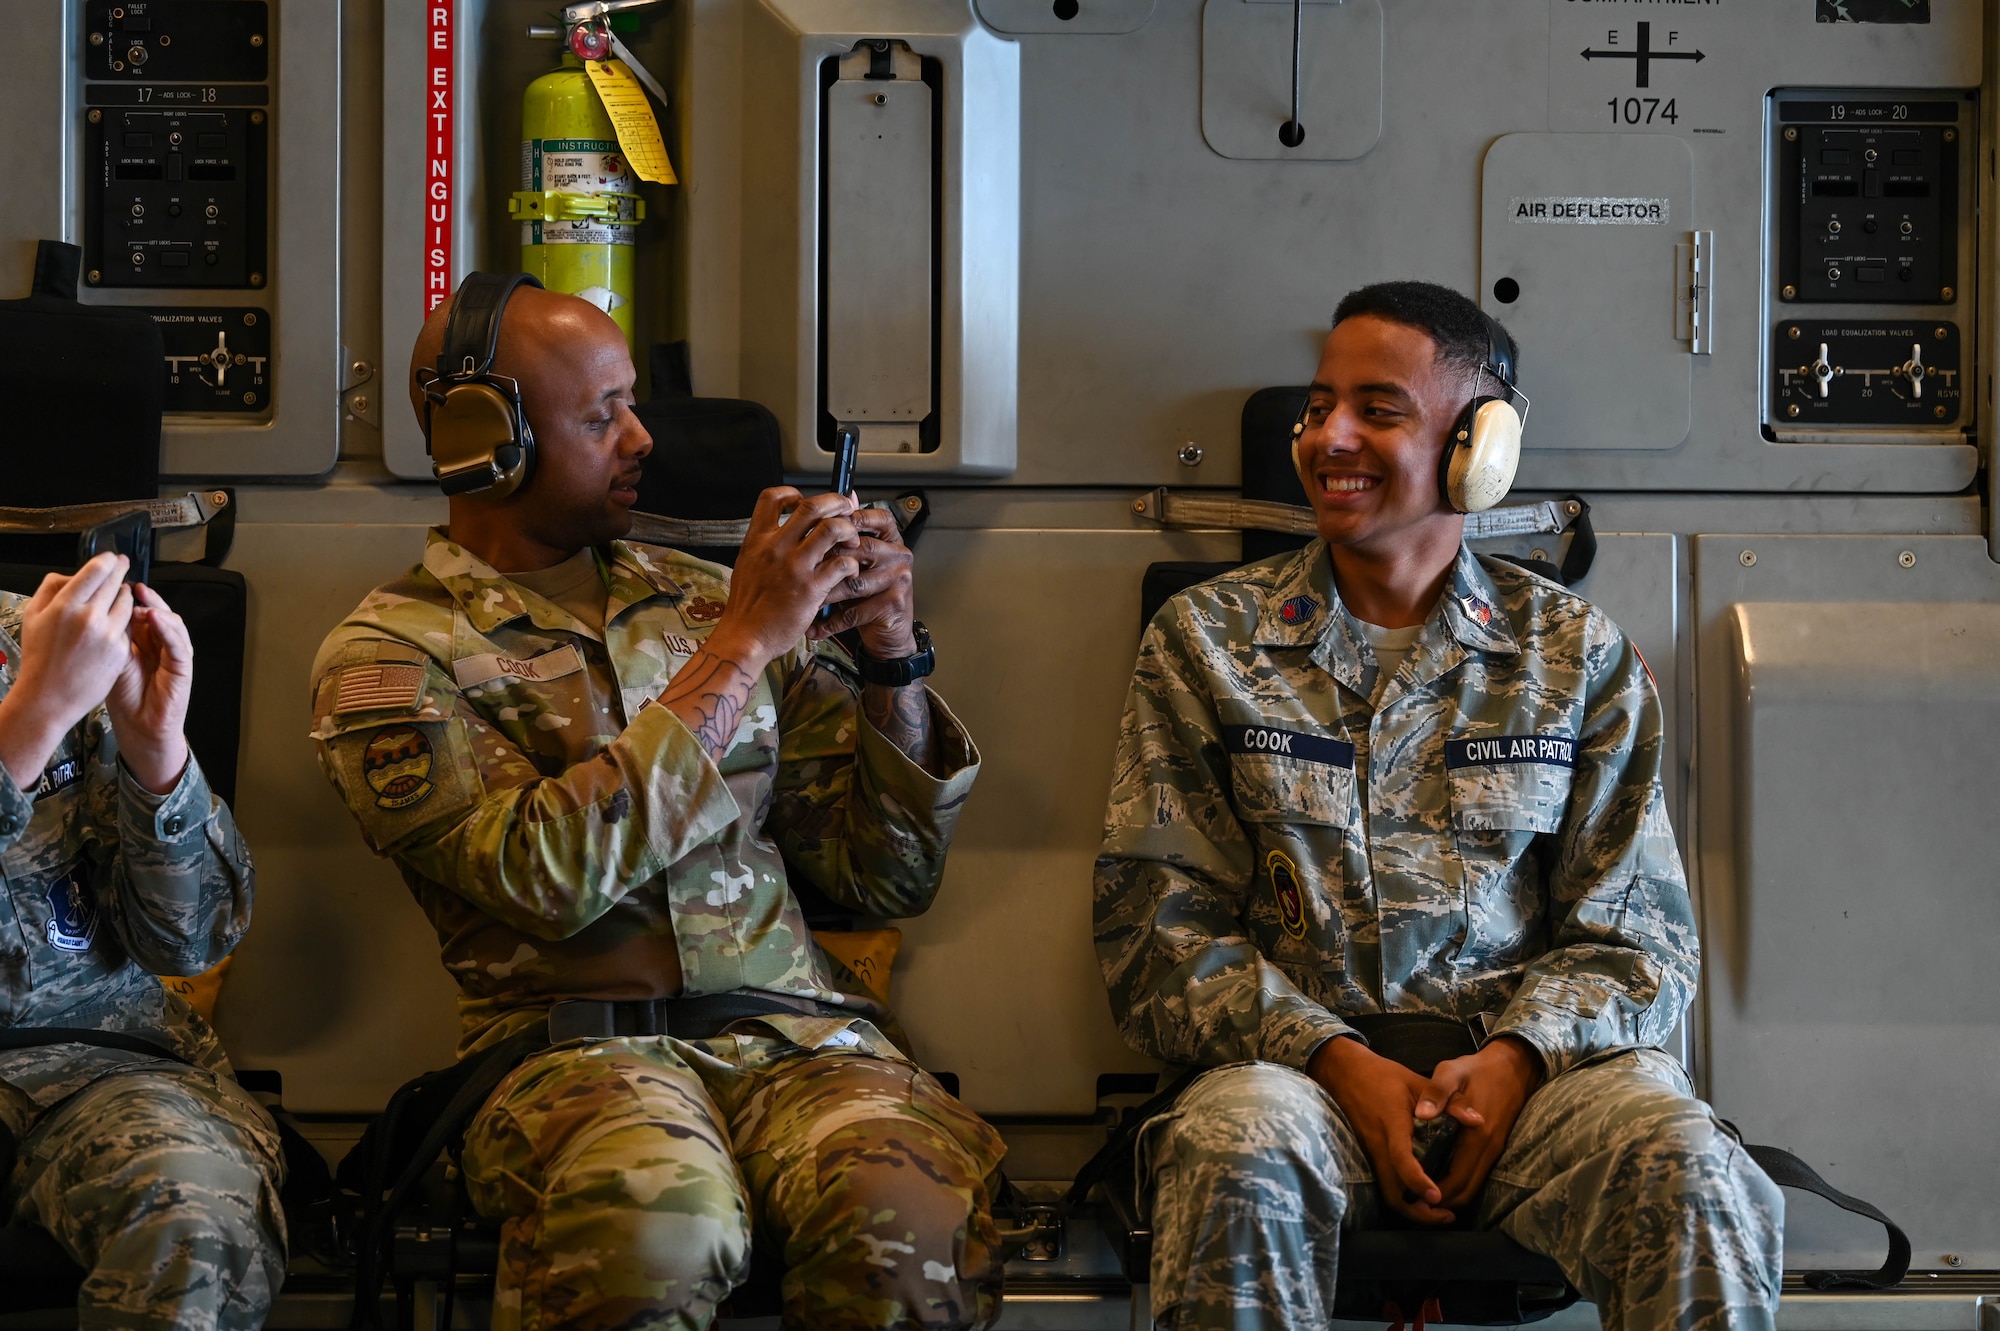 Airman takes photo of son while on an aircraft.